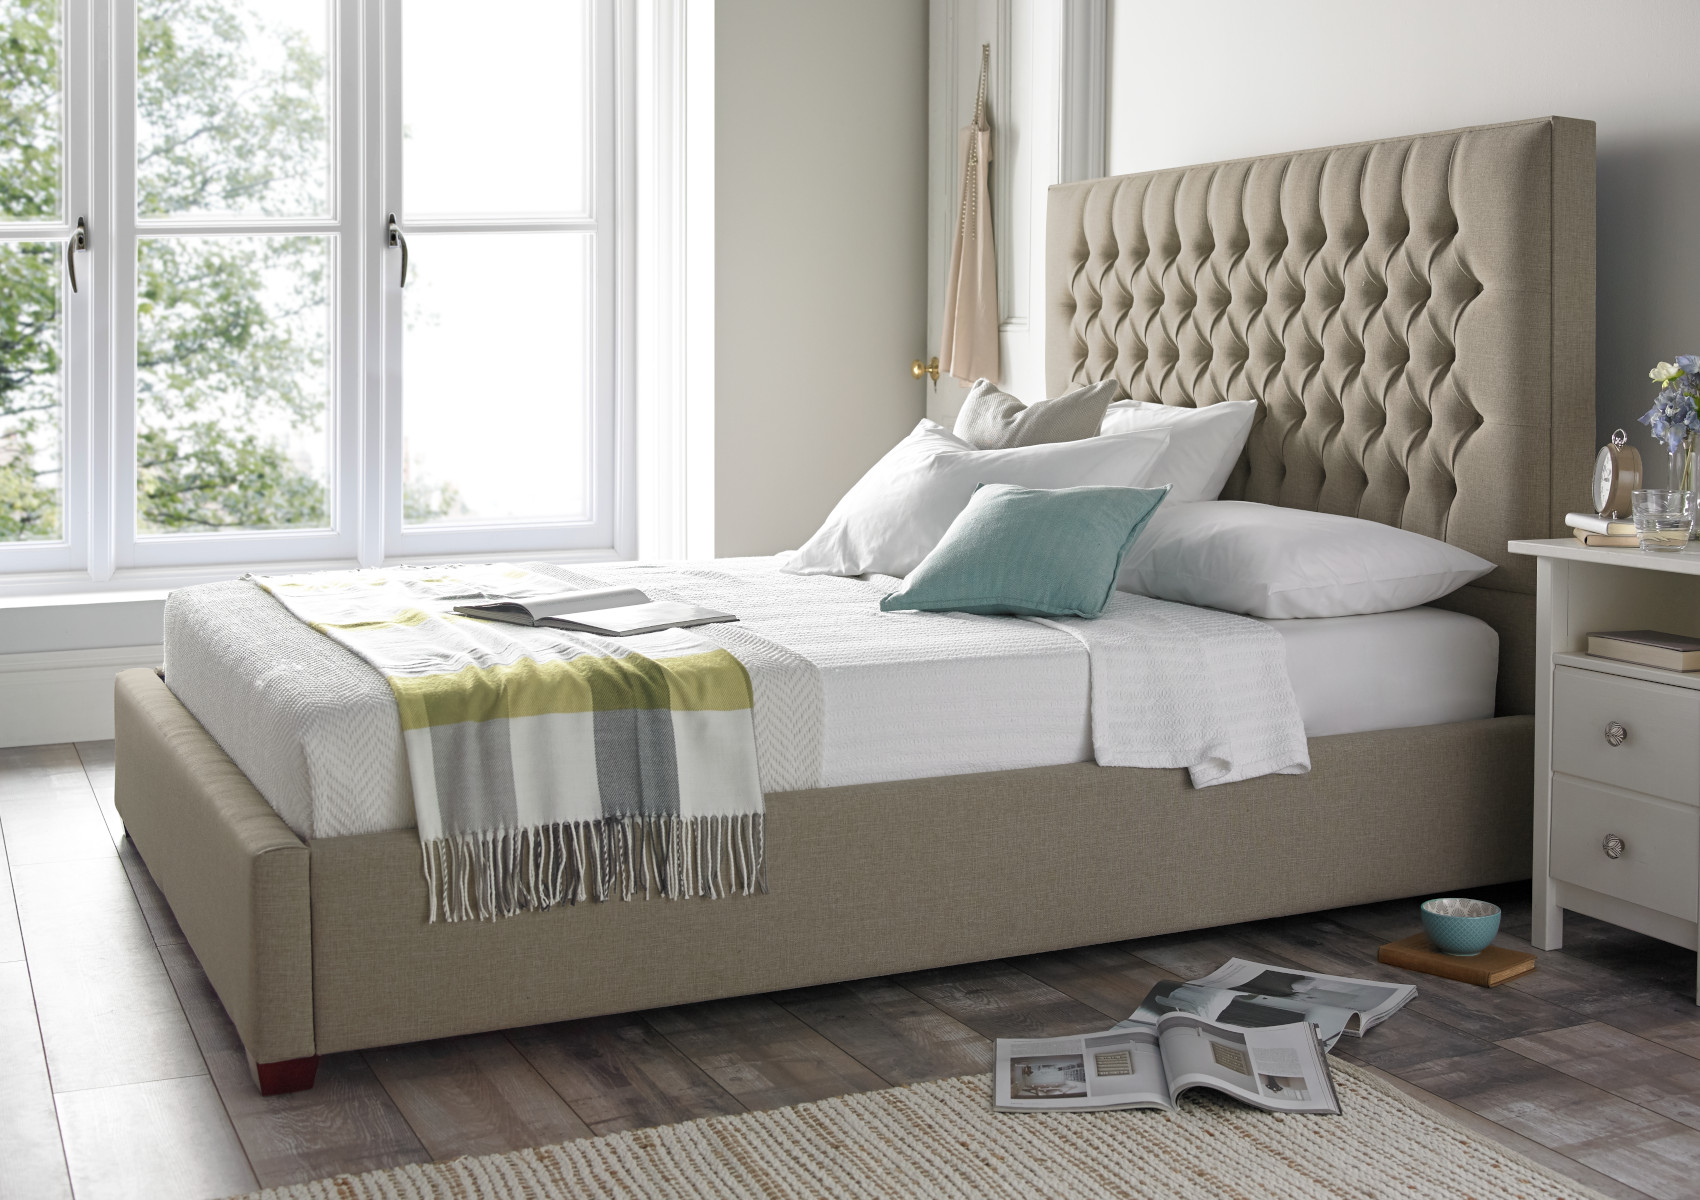 View Belgravia Naples Silver Upholstered Super King Bed Time4Sleep information